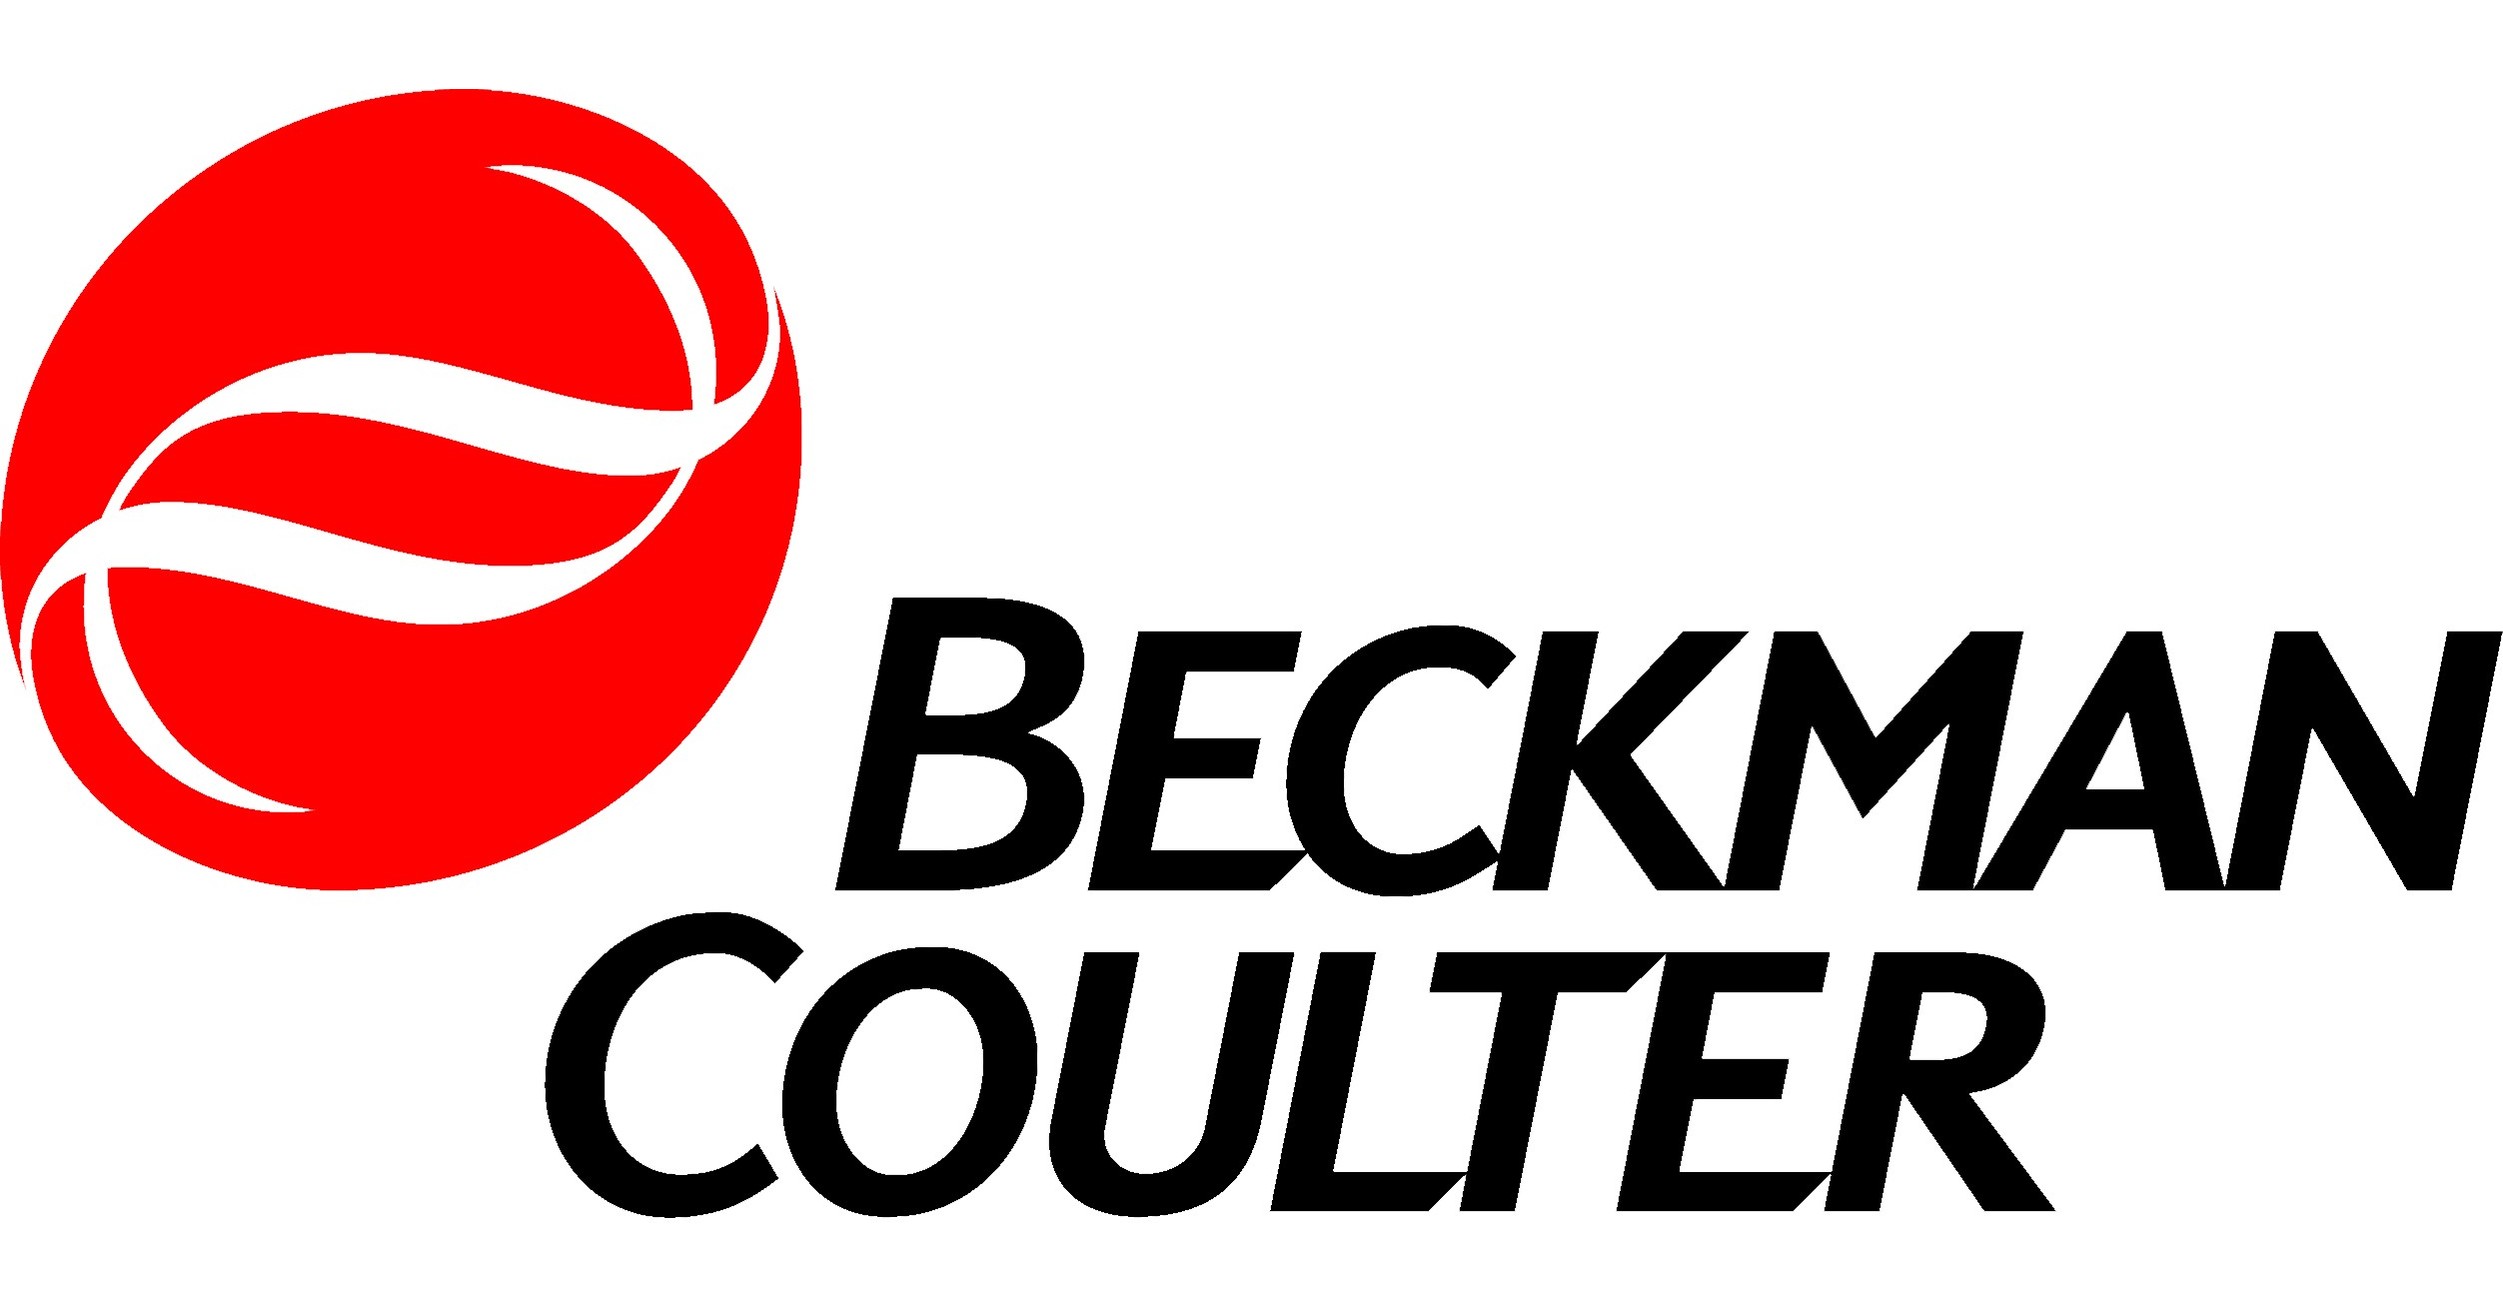 Beckman Coulter Careers